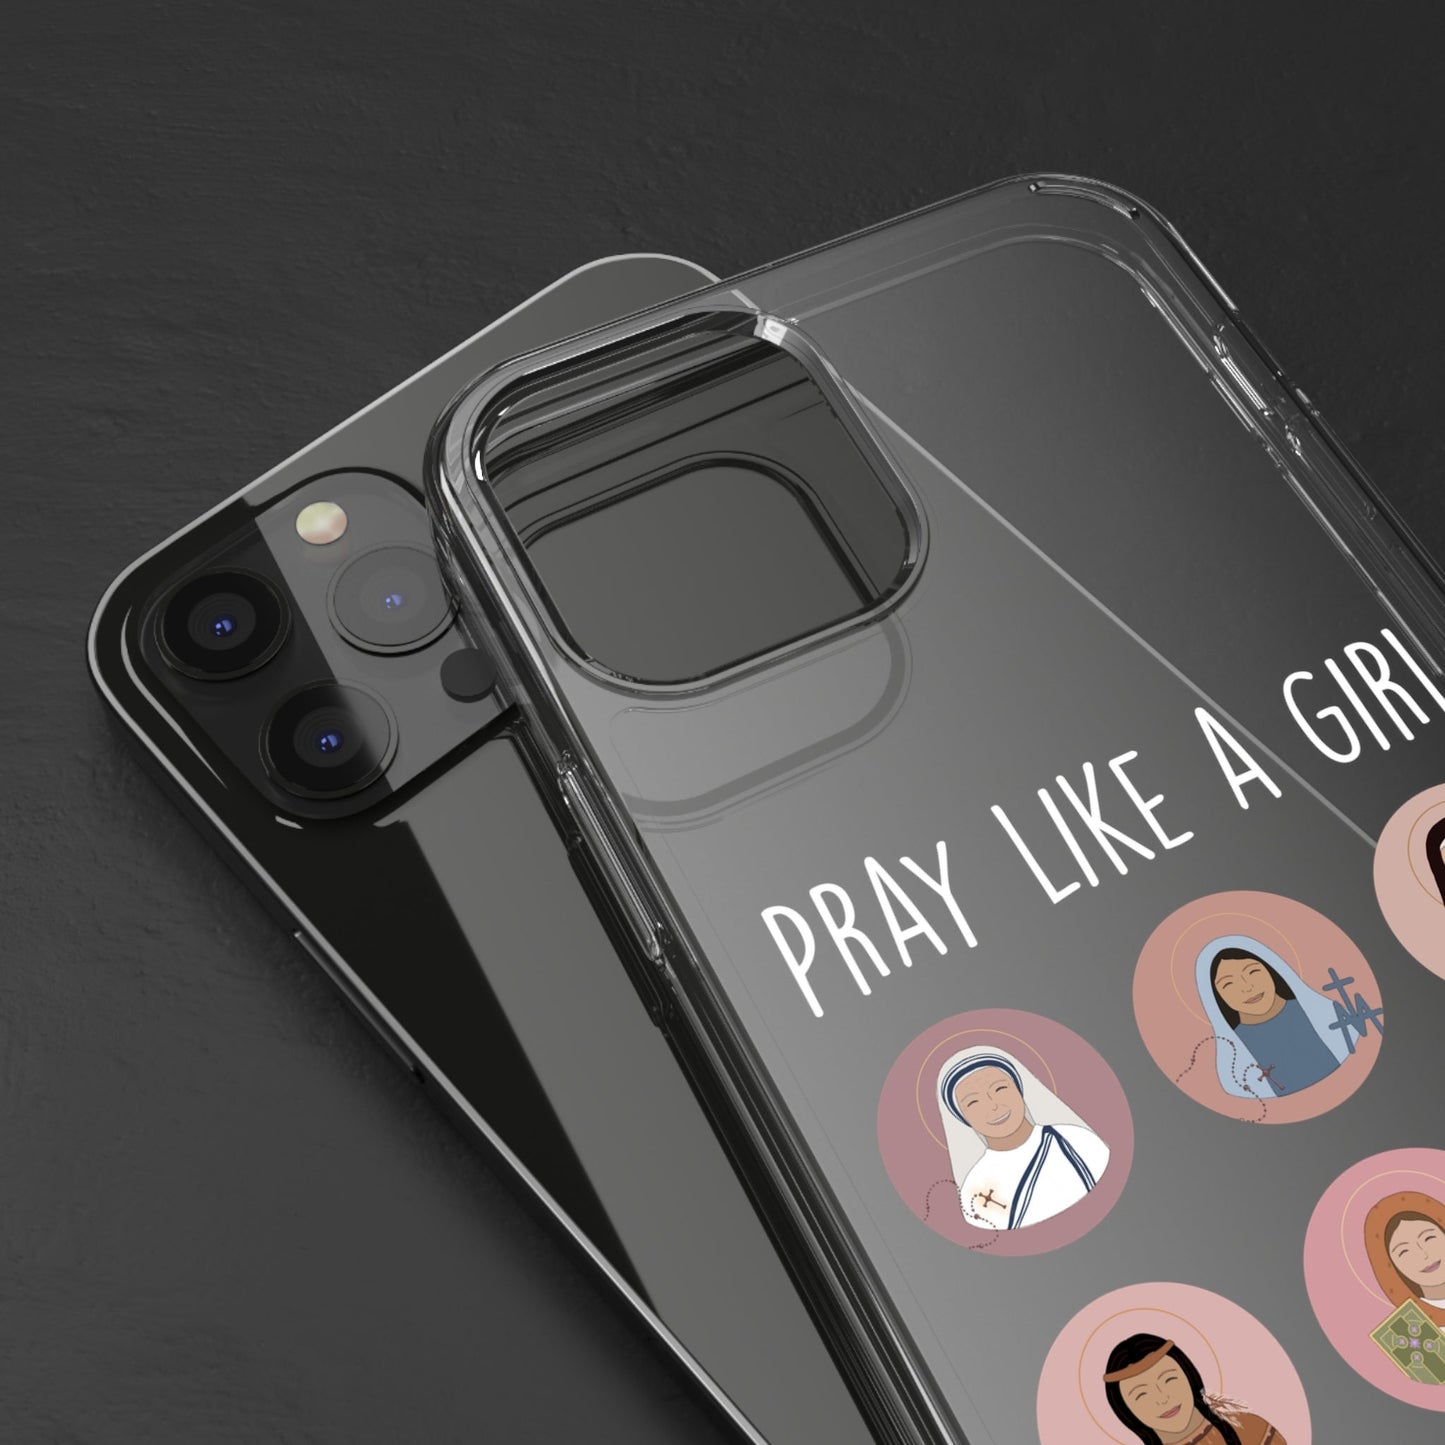 Pray Like a Girl Samsung and iPhone Case Violet Heart Studios